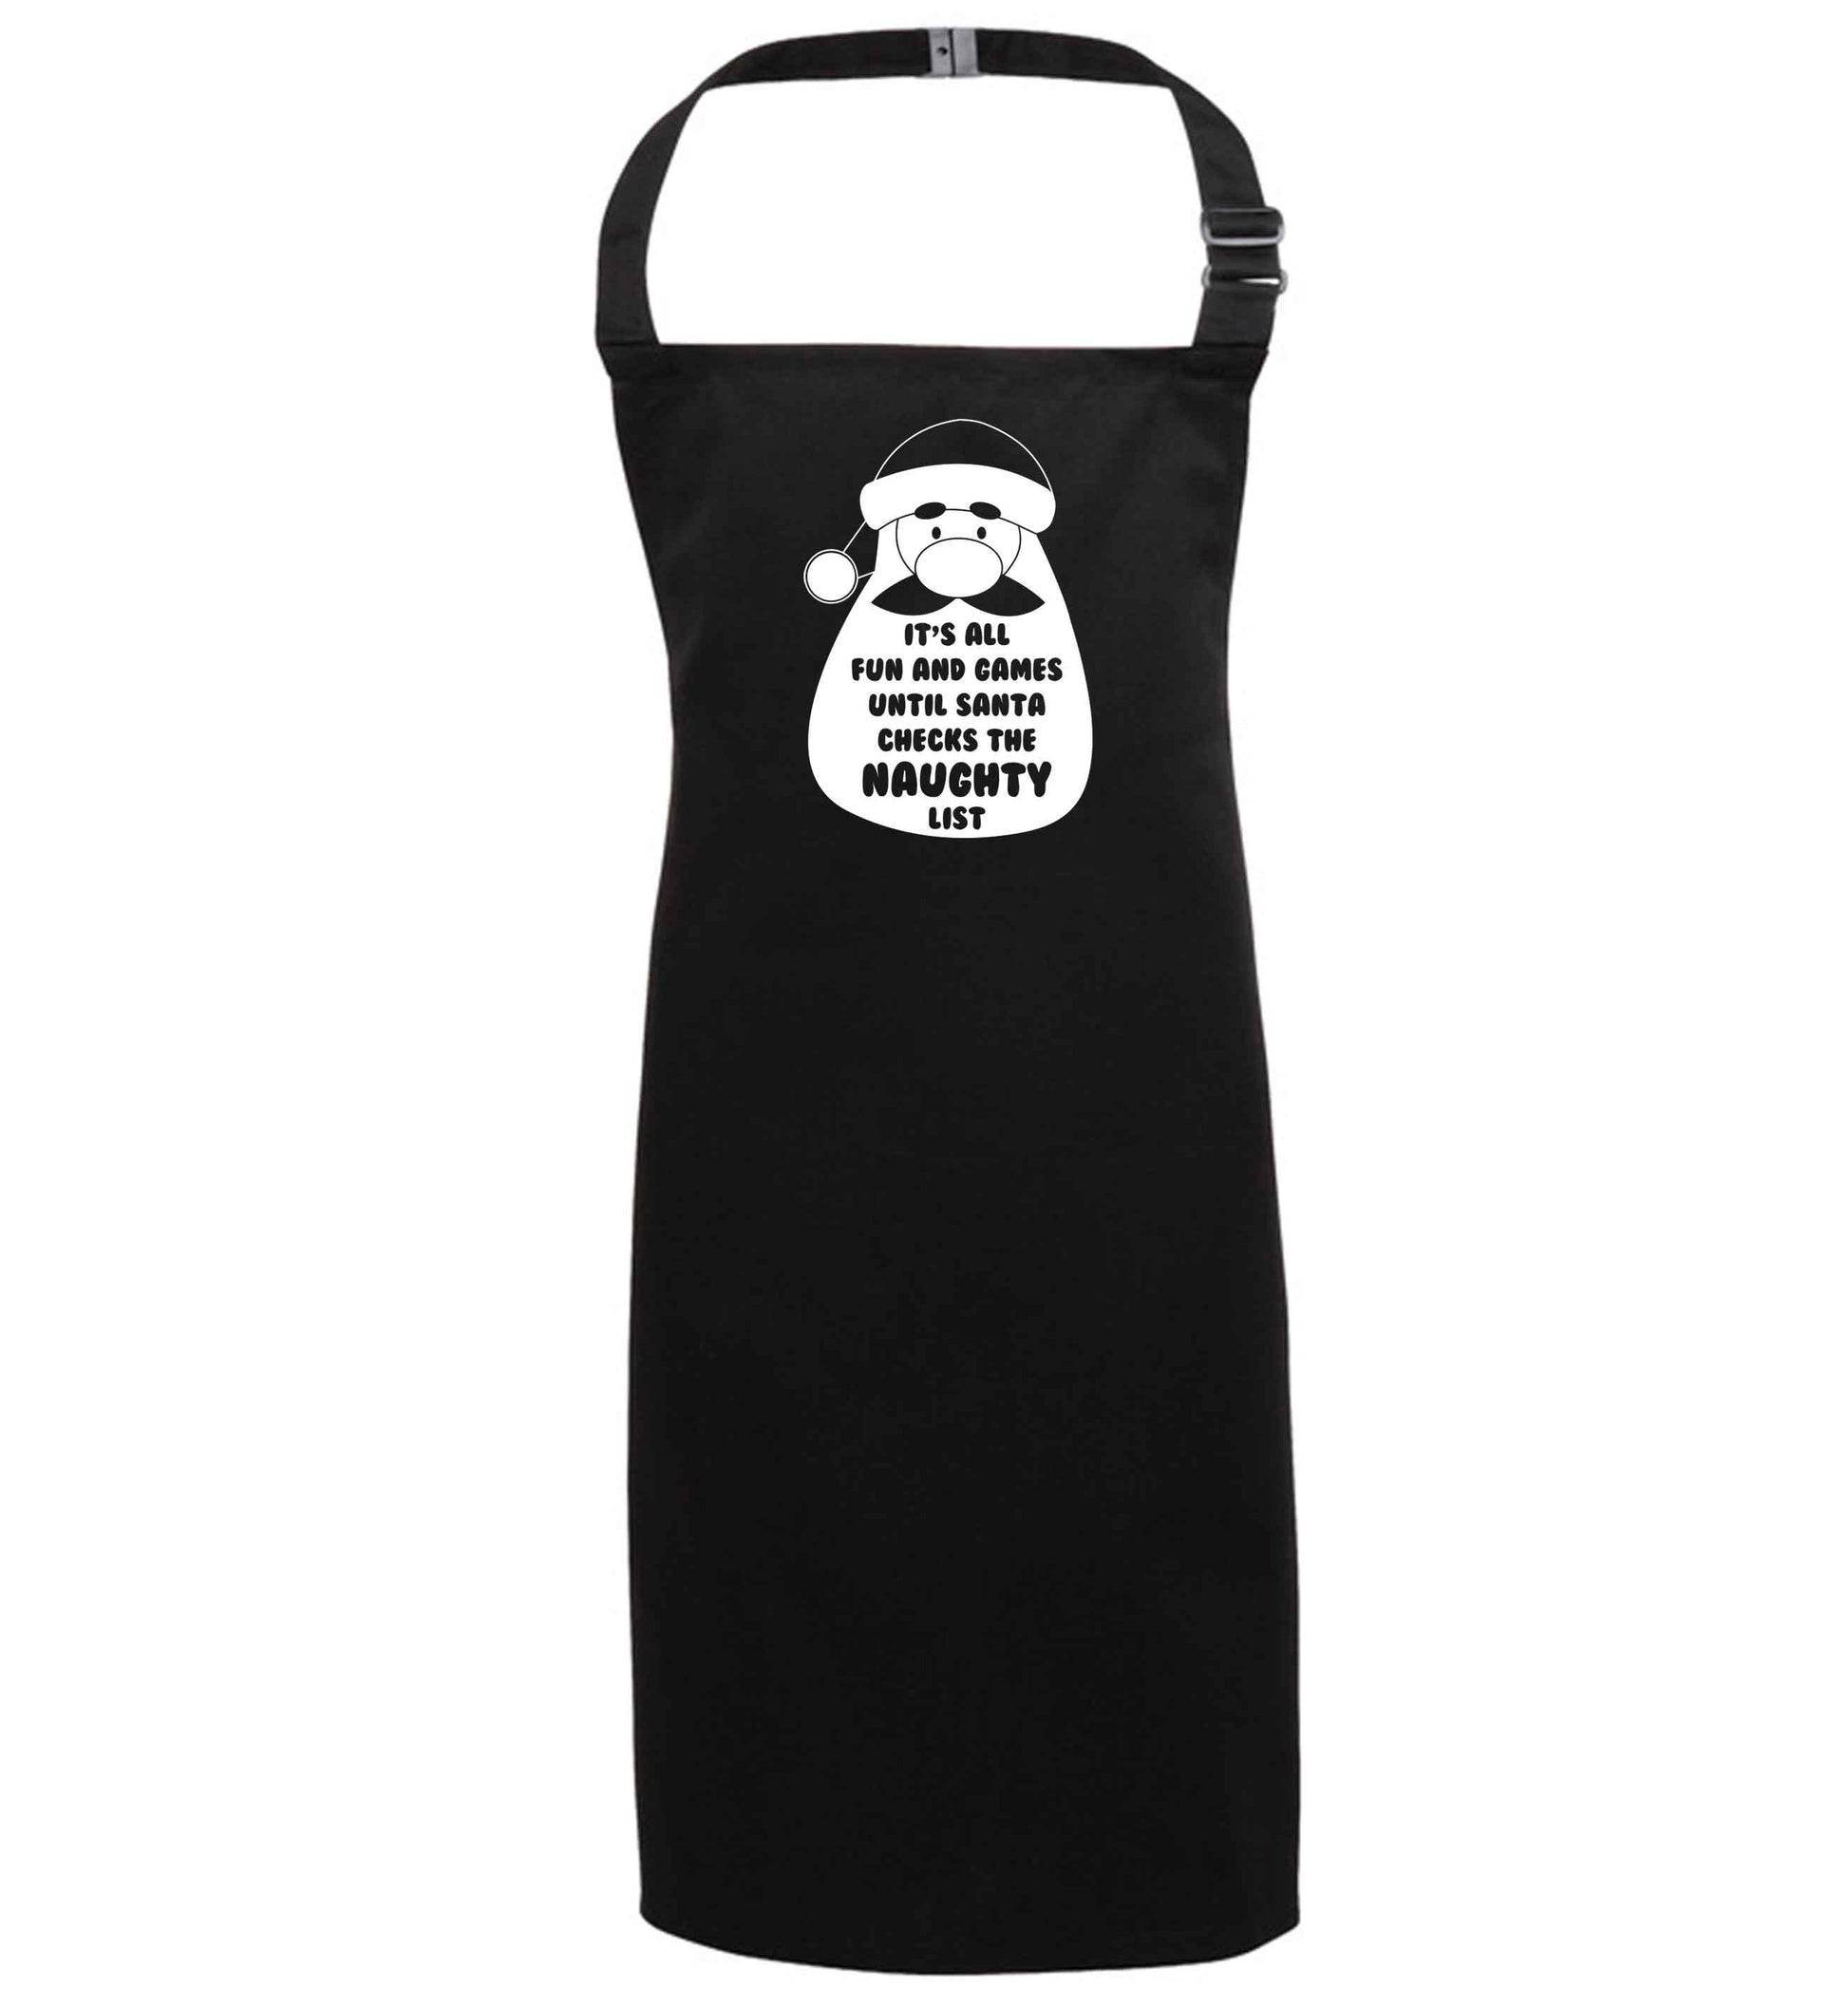 It's all fun and games until Santa checks the naughty list black apron 7-10 years